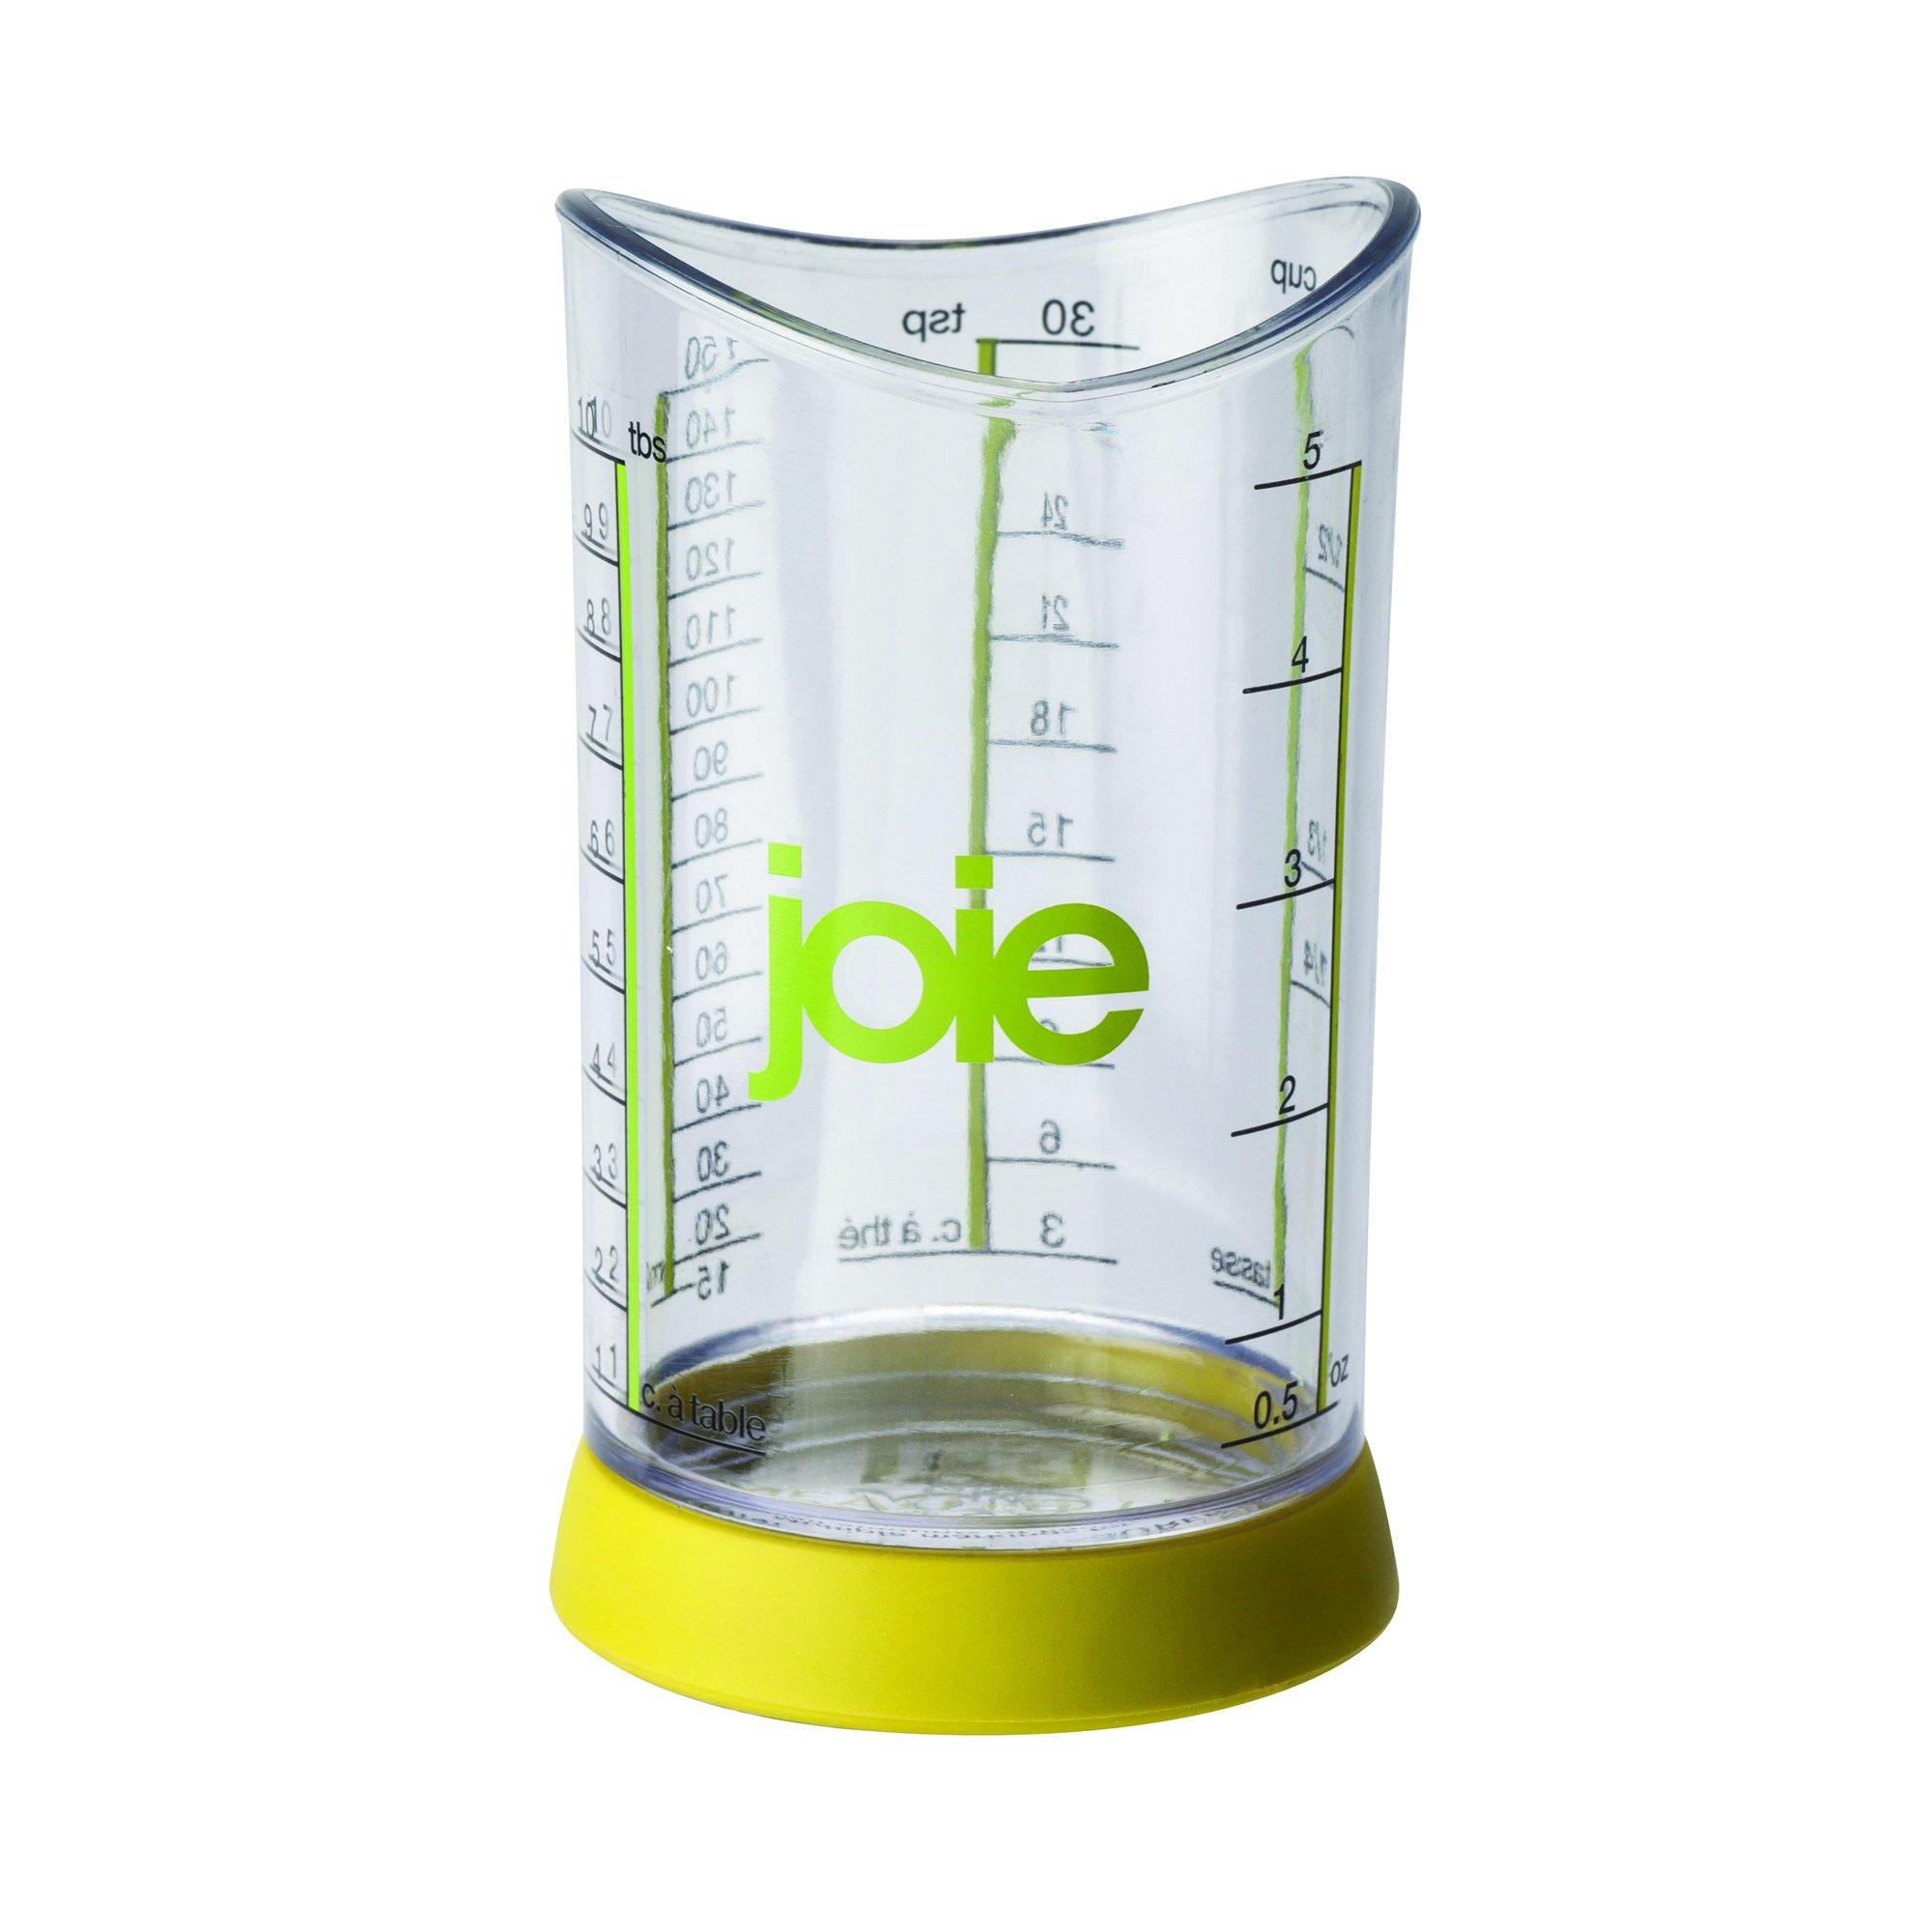 Joie MSC Joie Measuring Cup - Dollar Max Depot